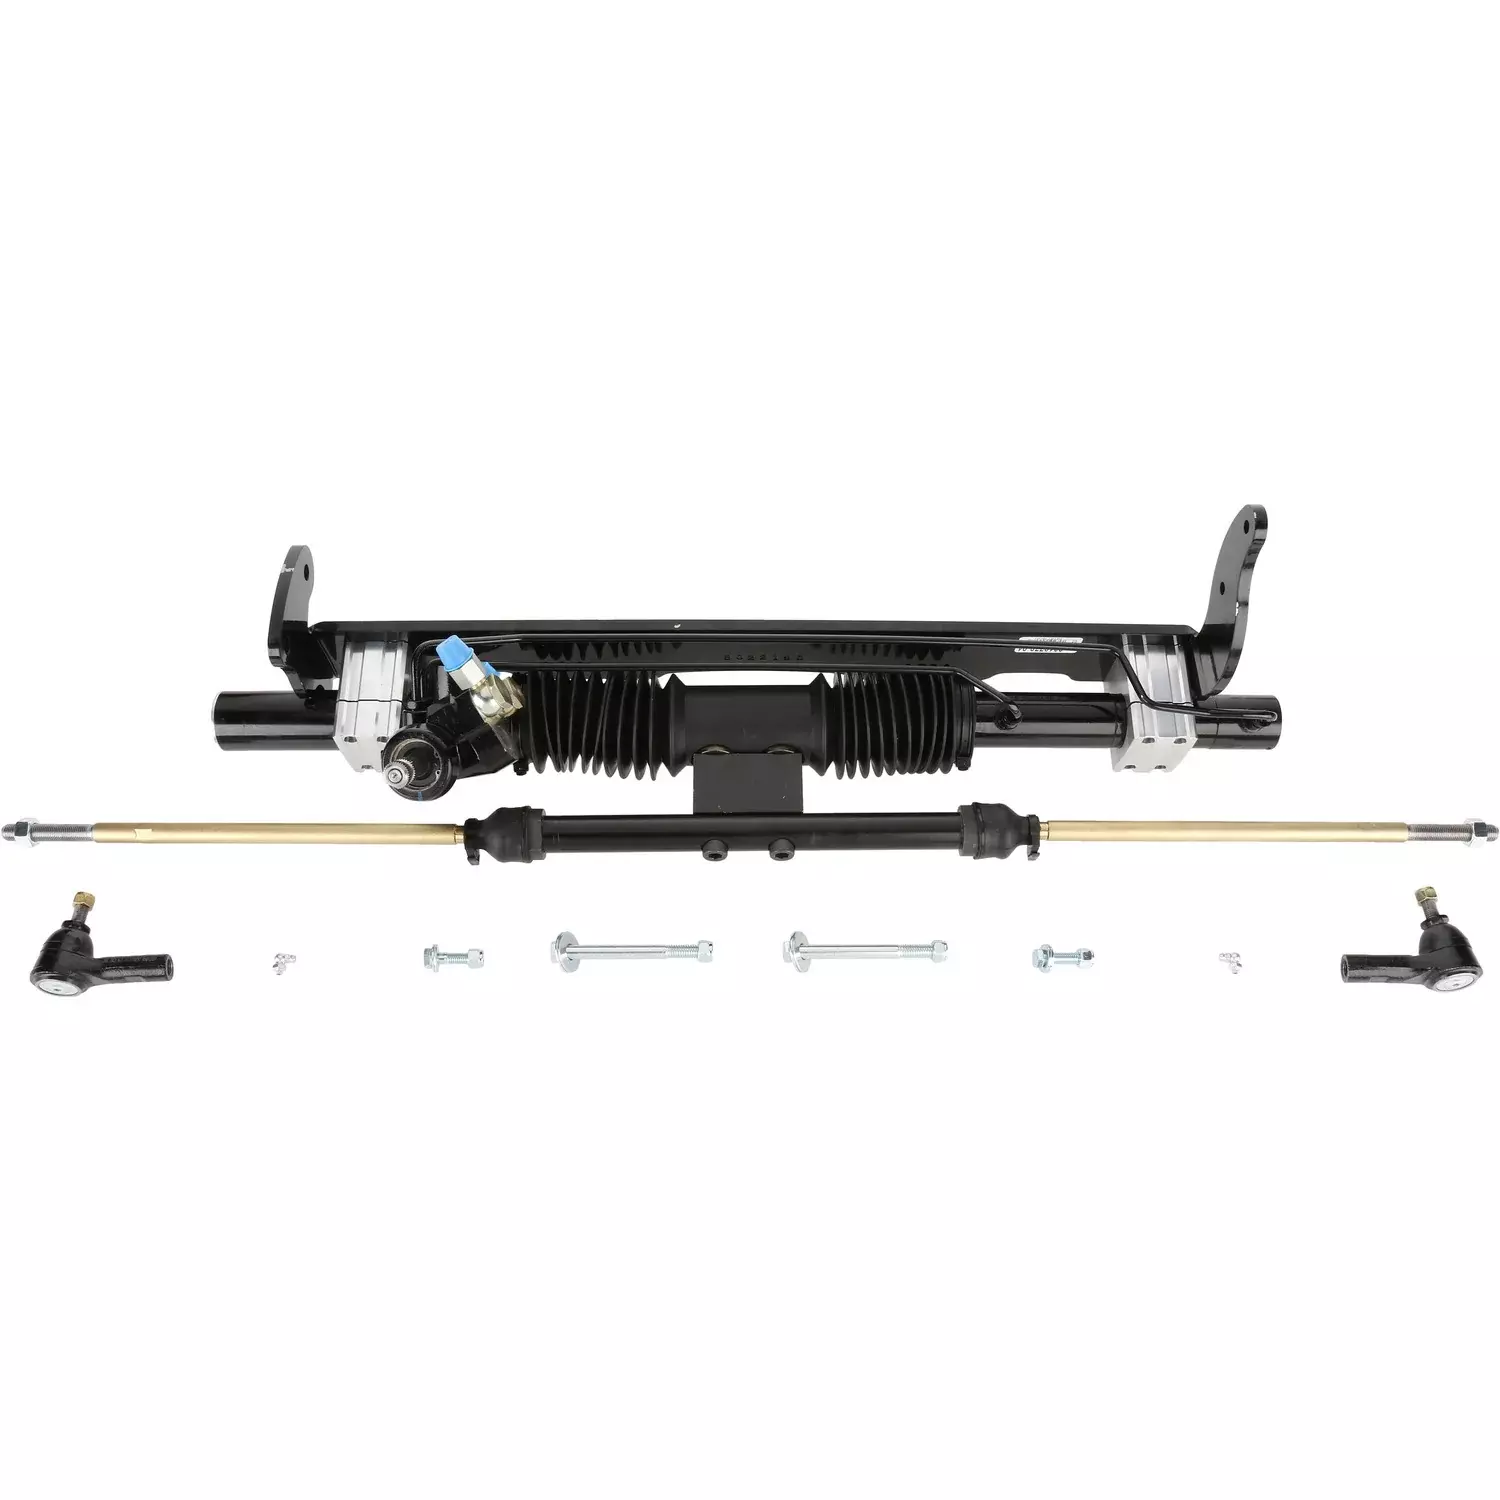 Unisteer Performance 8010770-01 Rack and Pinion, Power, Tie Rods / Brackets Included, Aluminum, Black Powder Coat, GM A-Body 1964-67, Kit